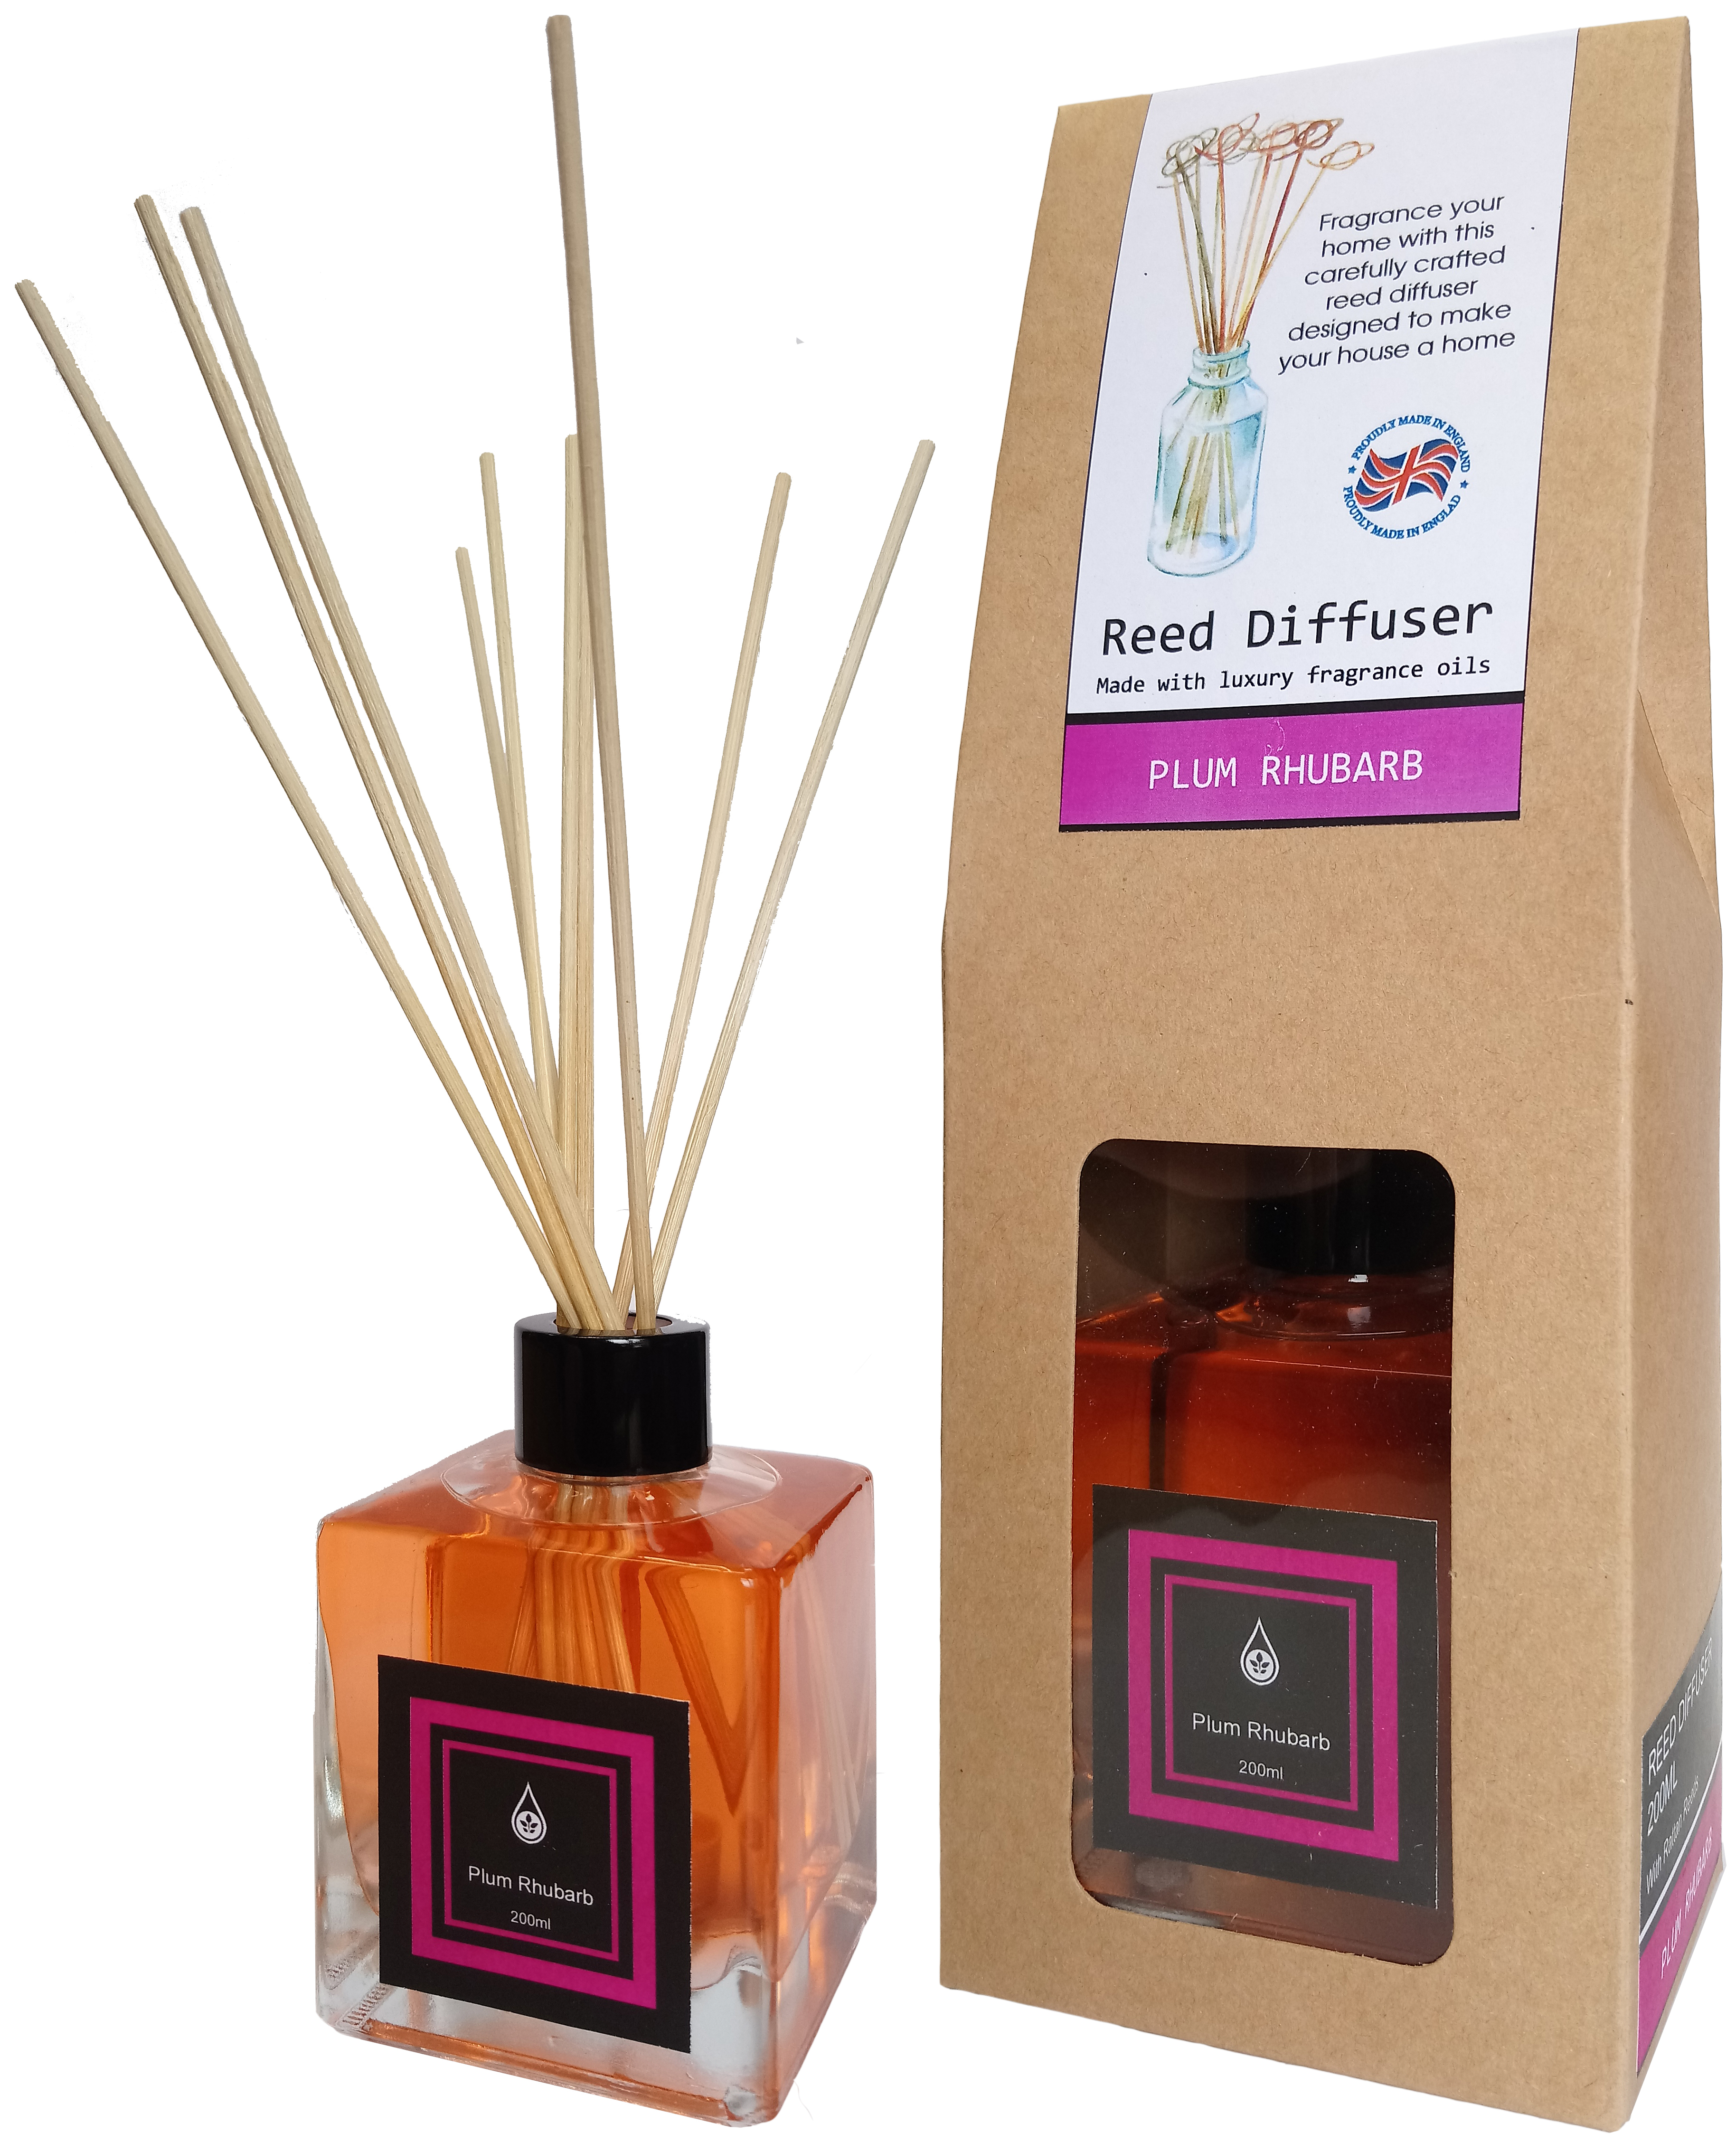 Plum & Rhubarb Home Fragrance Reed Diffuser - 200ml With Reeds